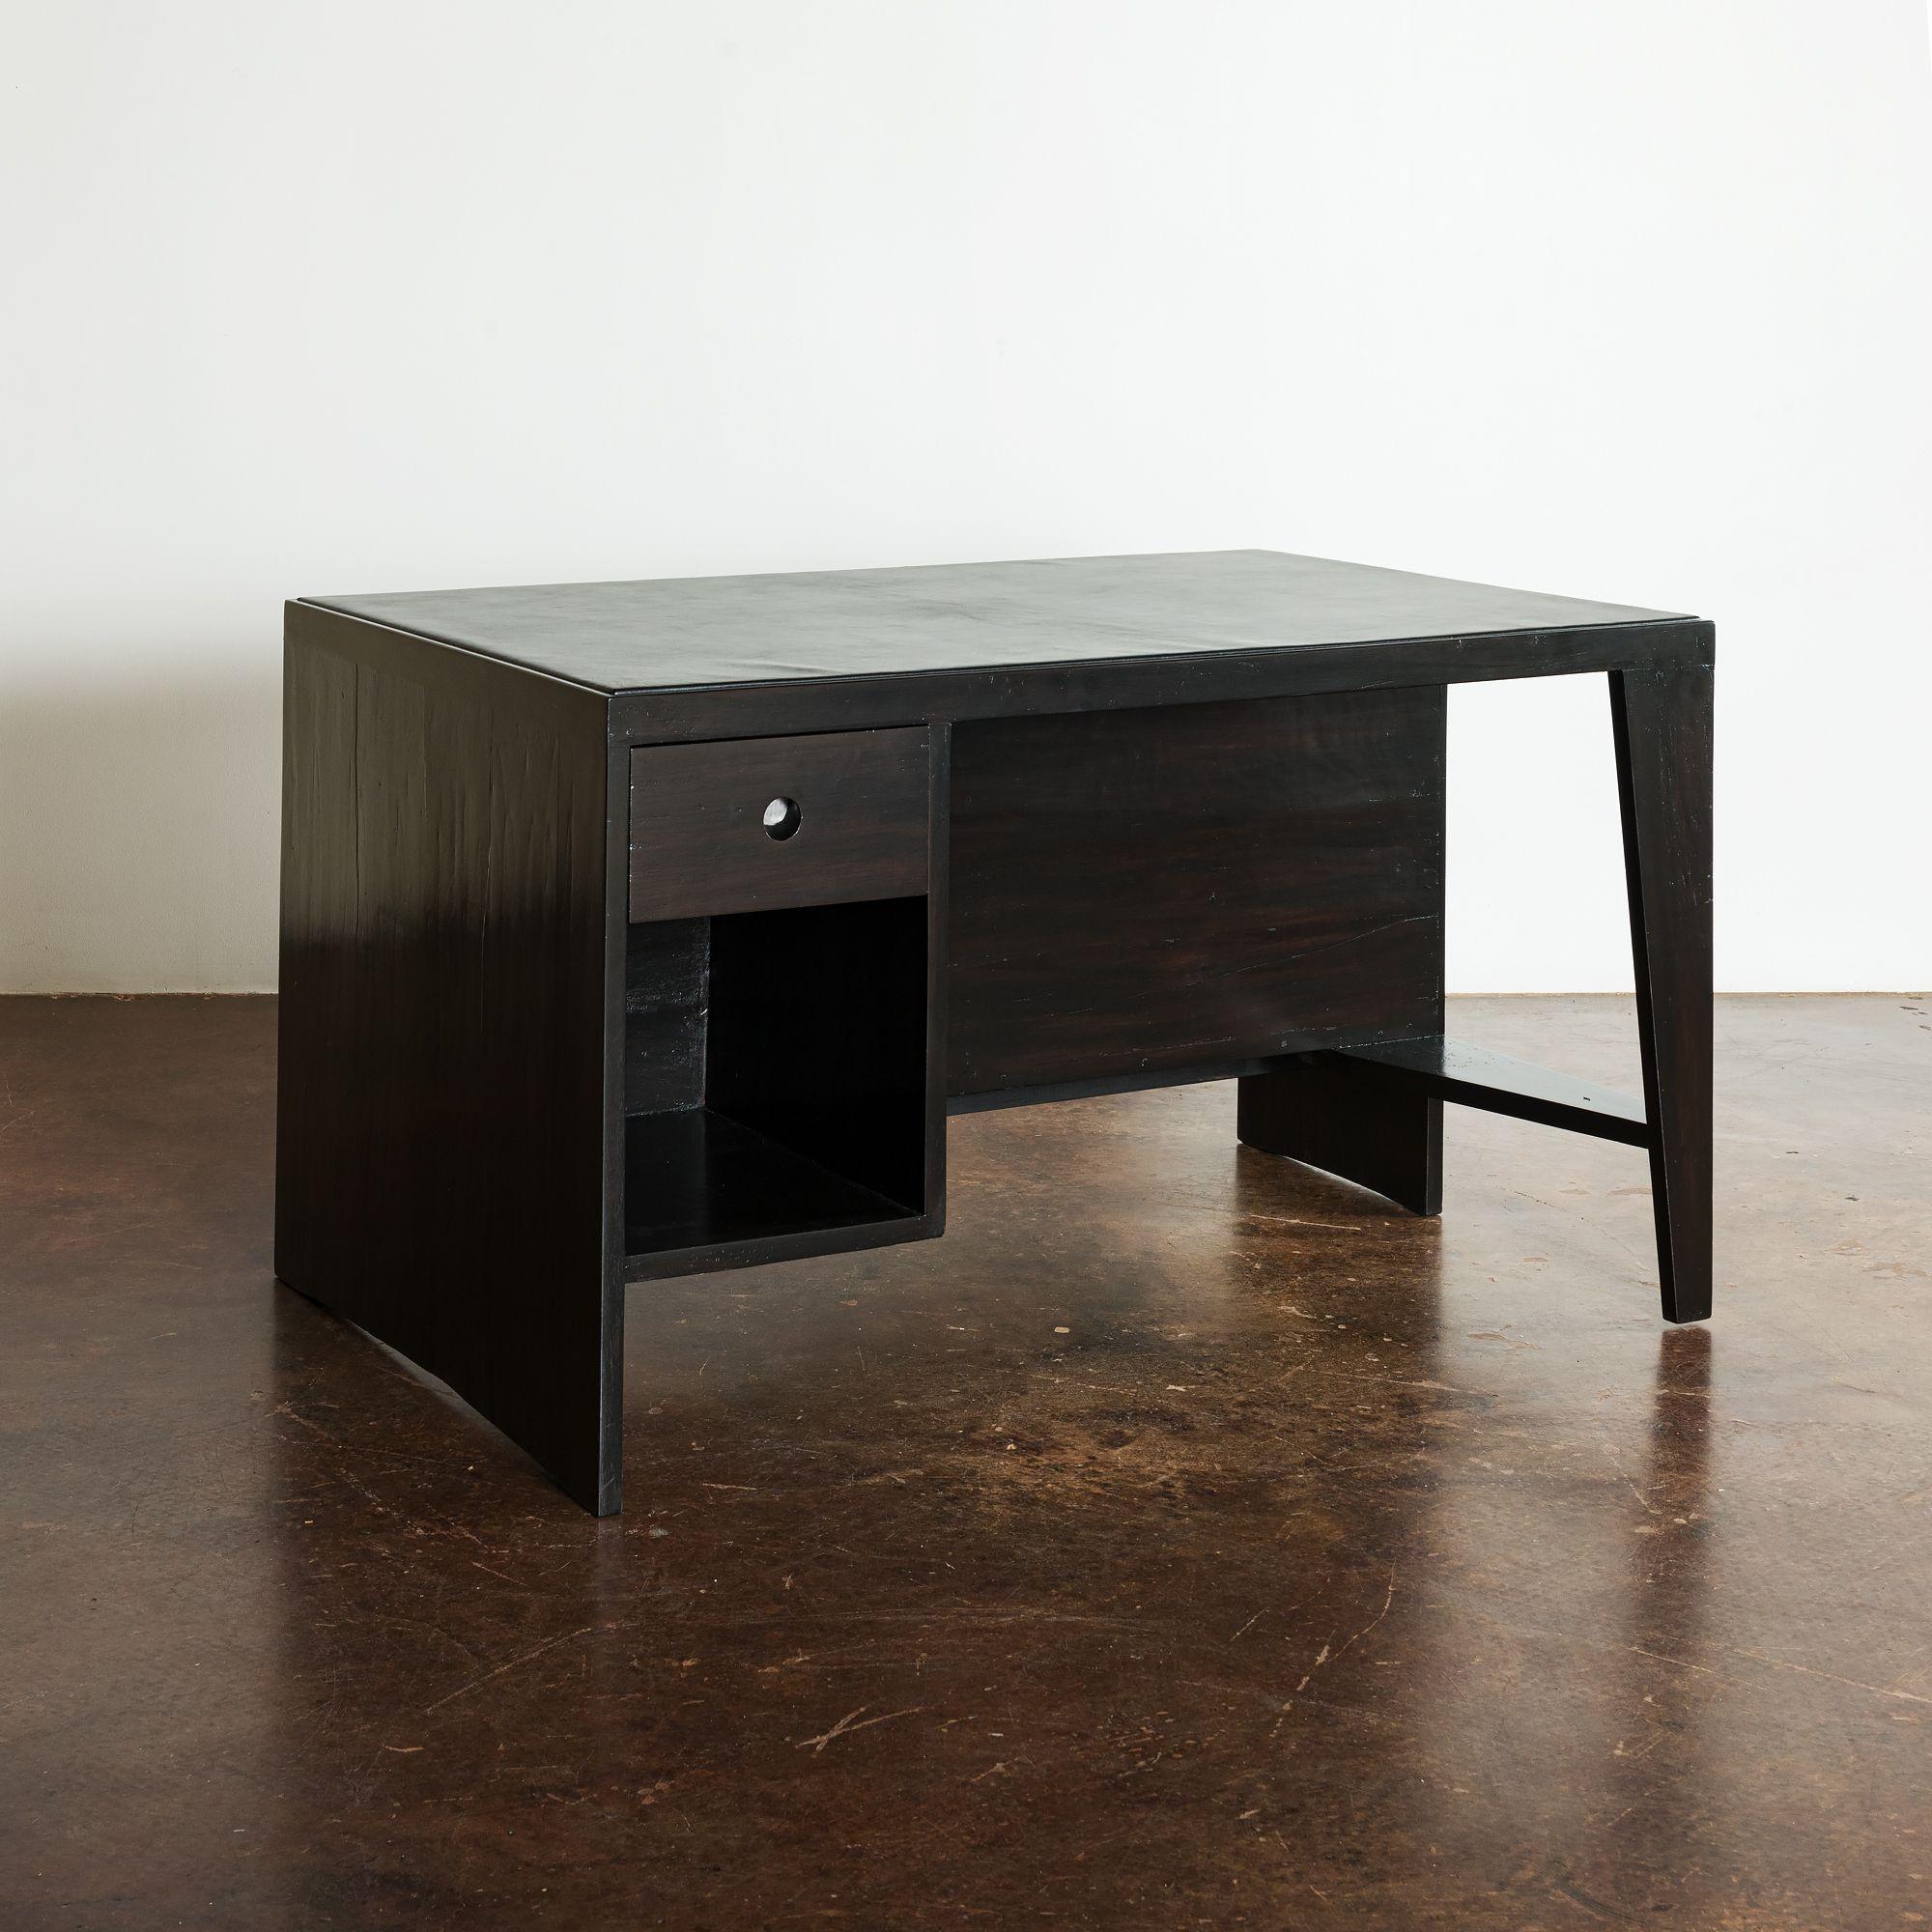 Pierre Jeanneret Pigeonhole Desk in Black Stain and Black Leather, India, 1950s For Sale 4